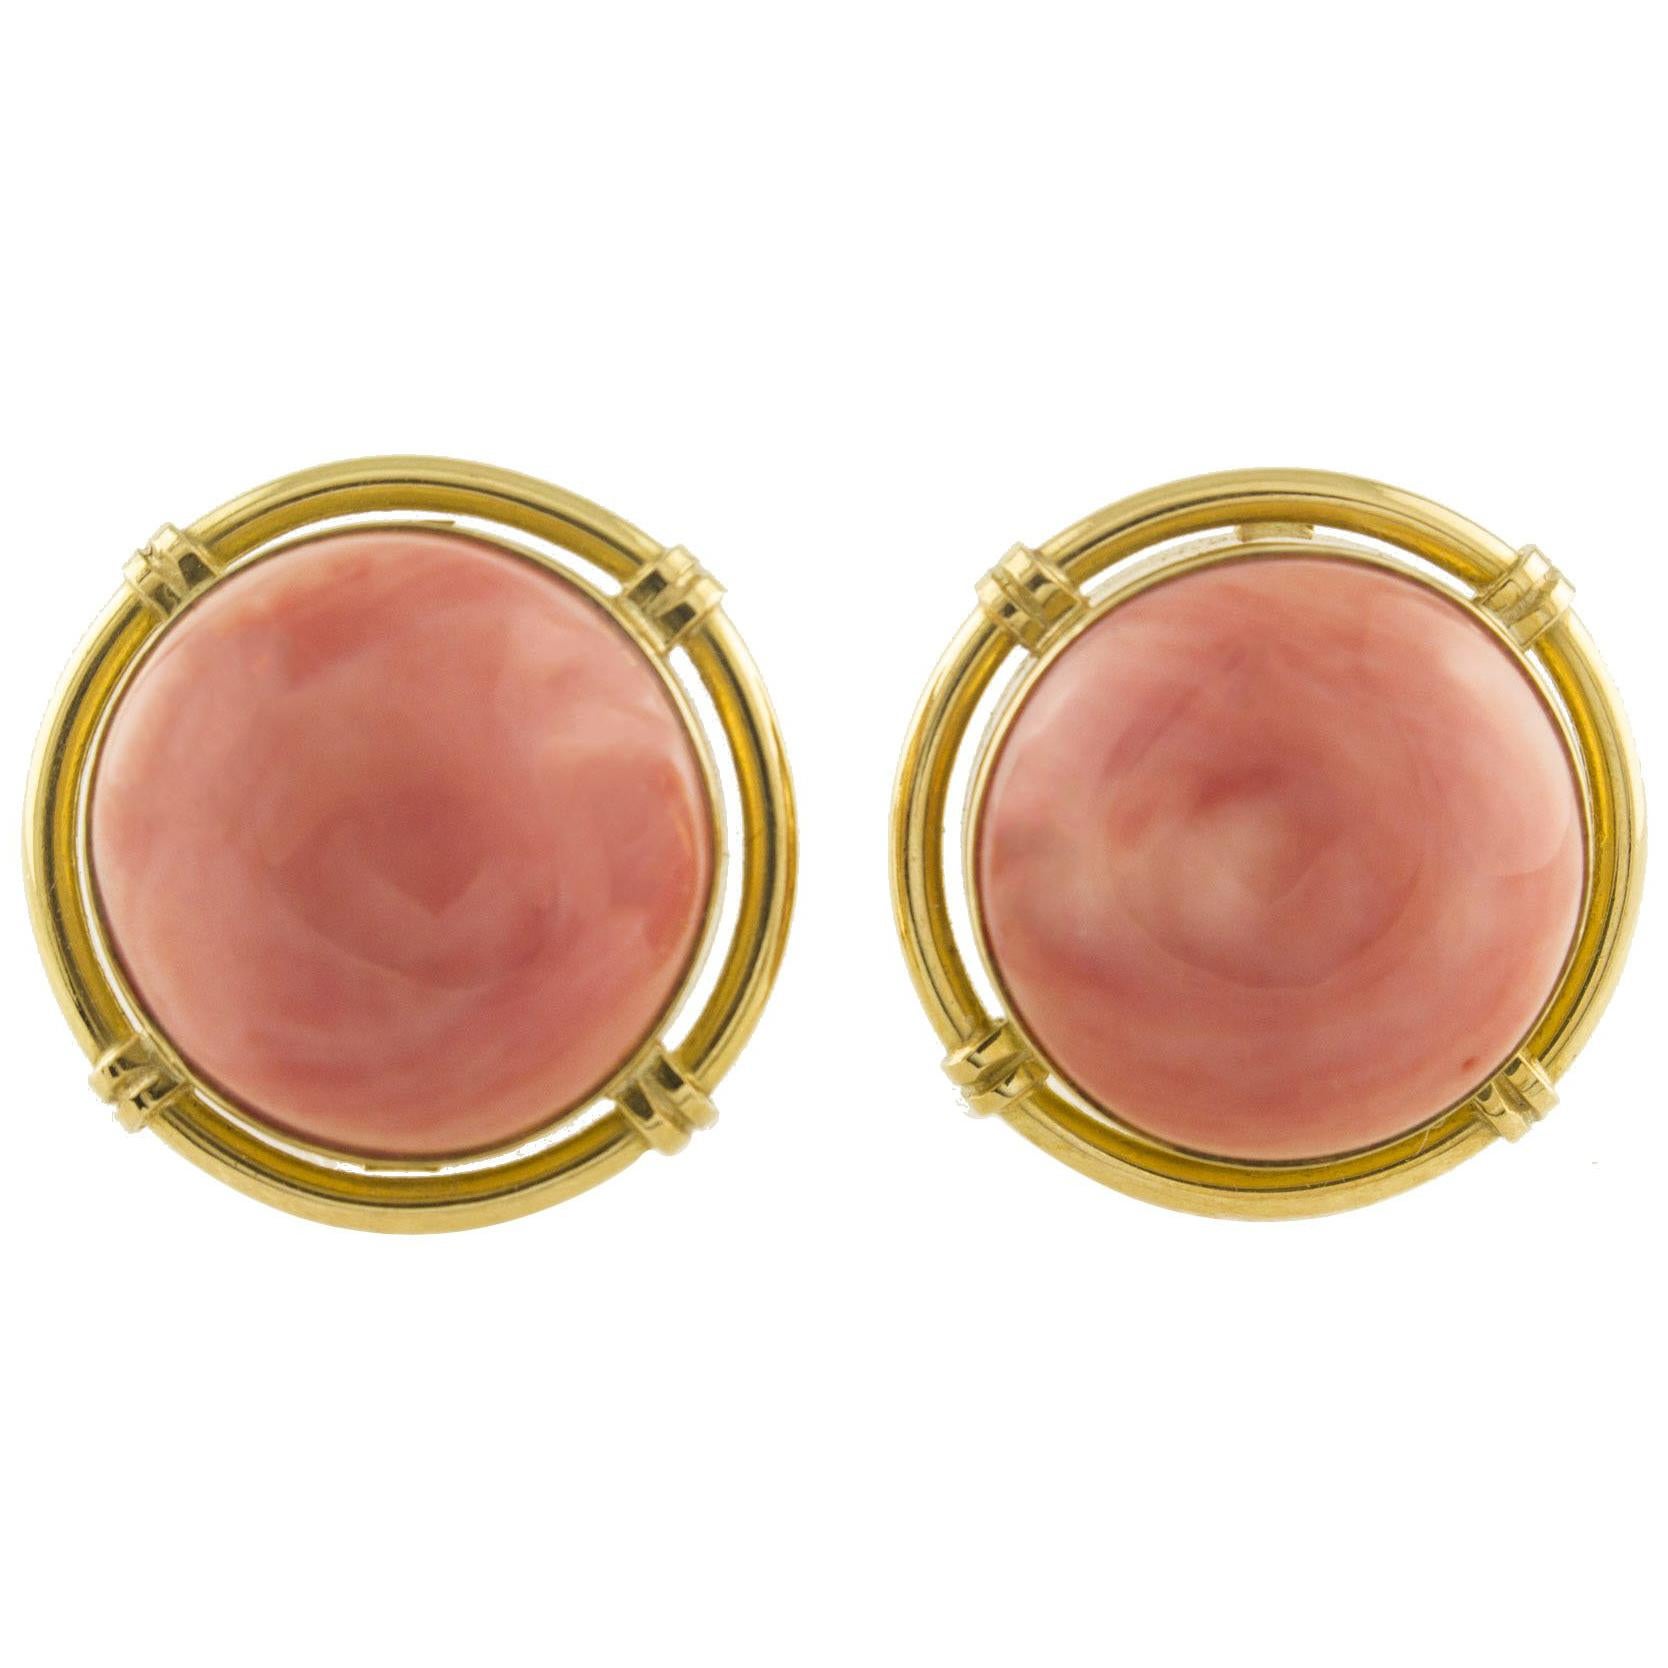 Orange/Pink Coral Buttons, 18K Yellow Gold Clip-on Earrings